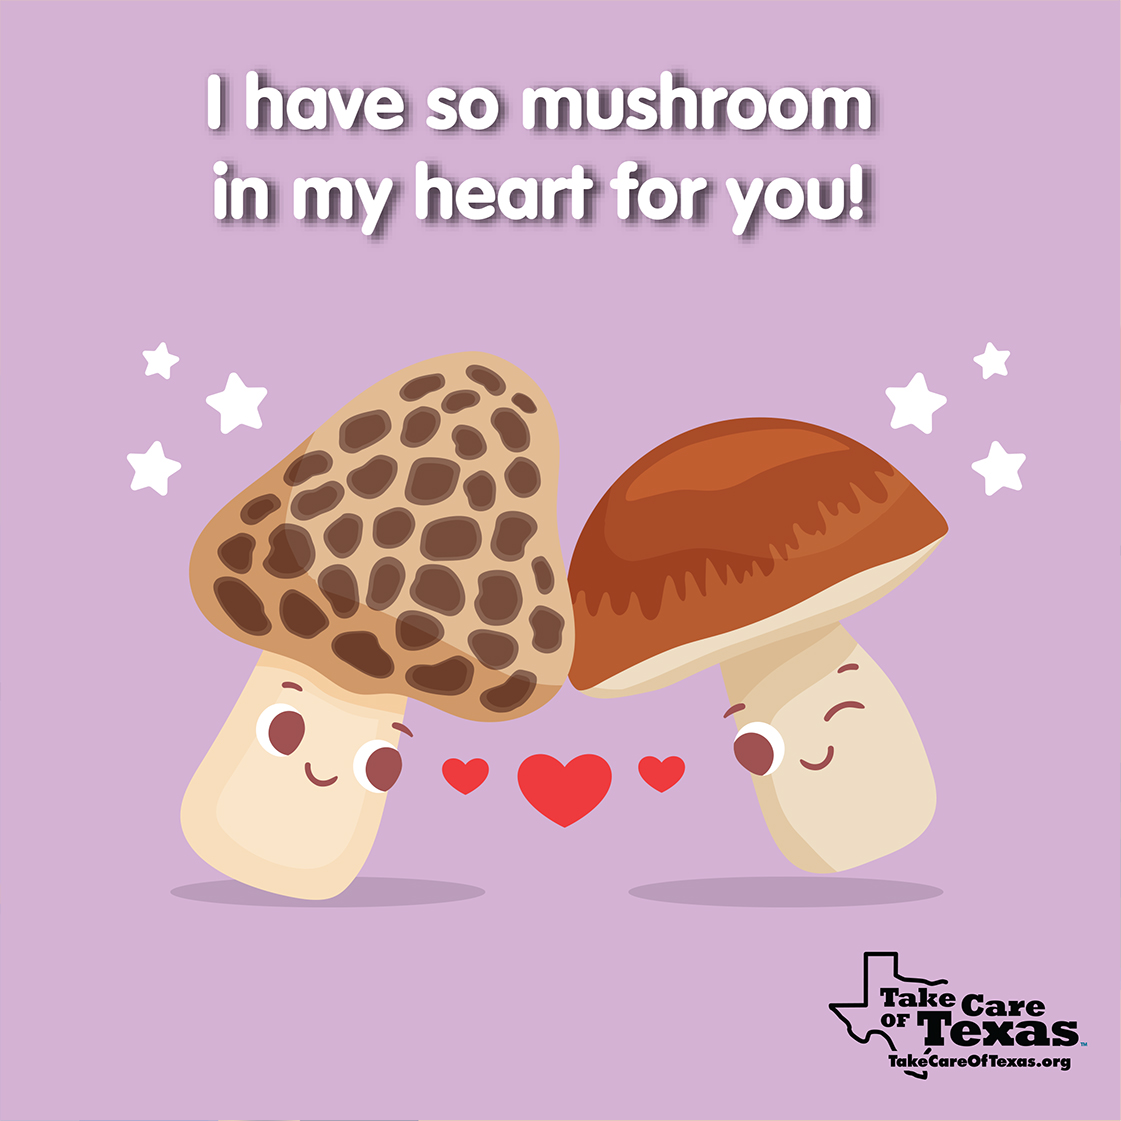 I have so mushroom in my heart for you!